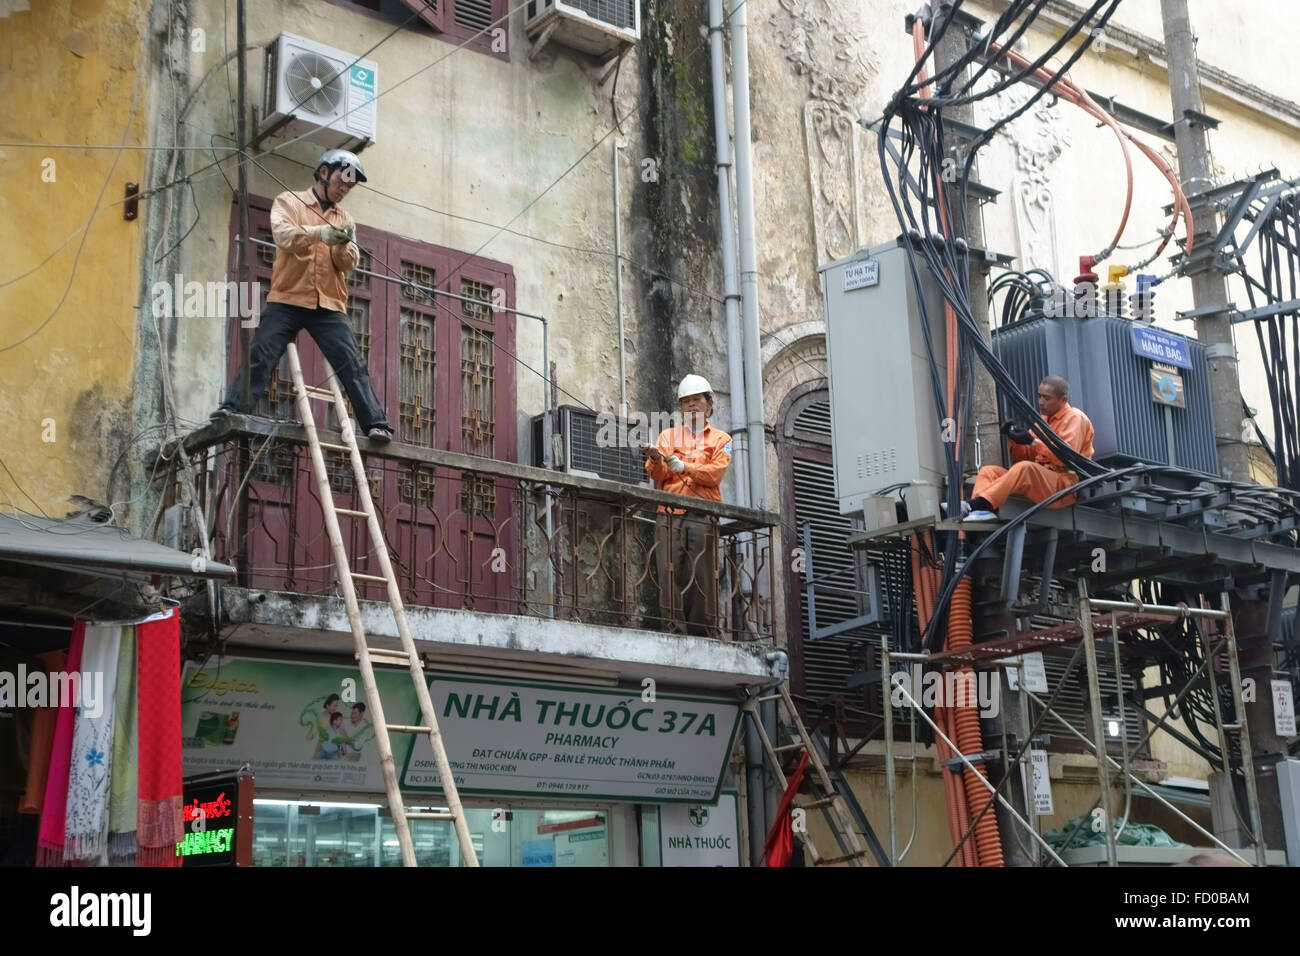 Electricians working on cables and a substation in the street without safety equipment in Hanoi, Vietnam Stock Photo